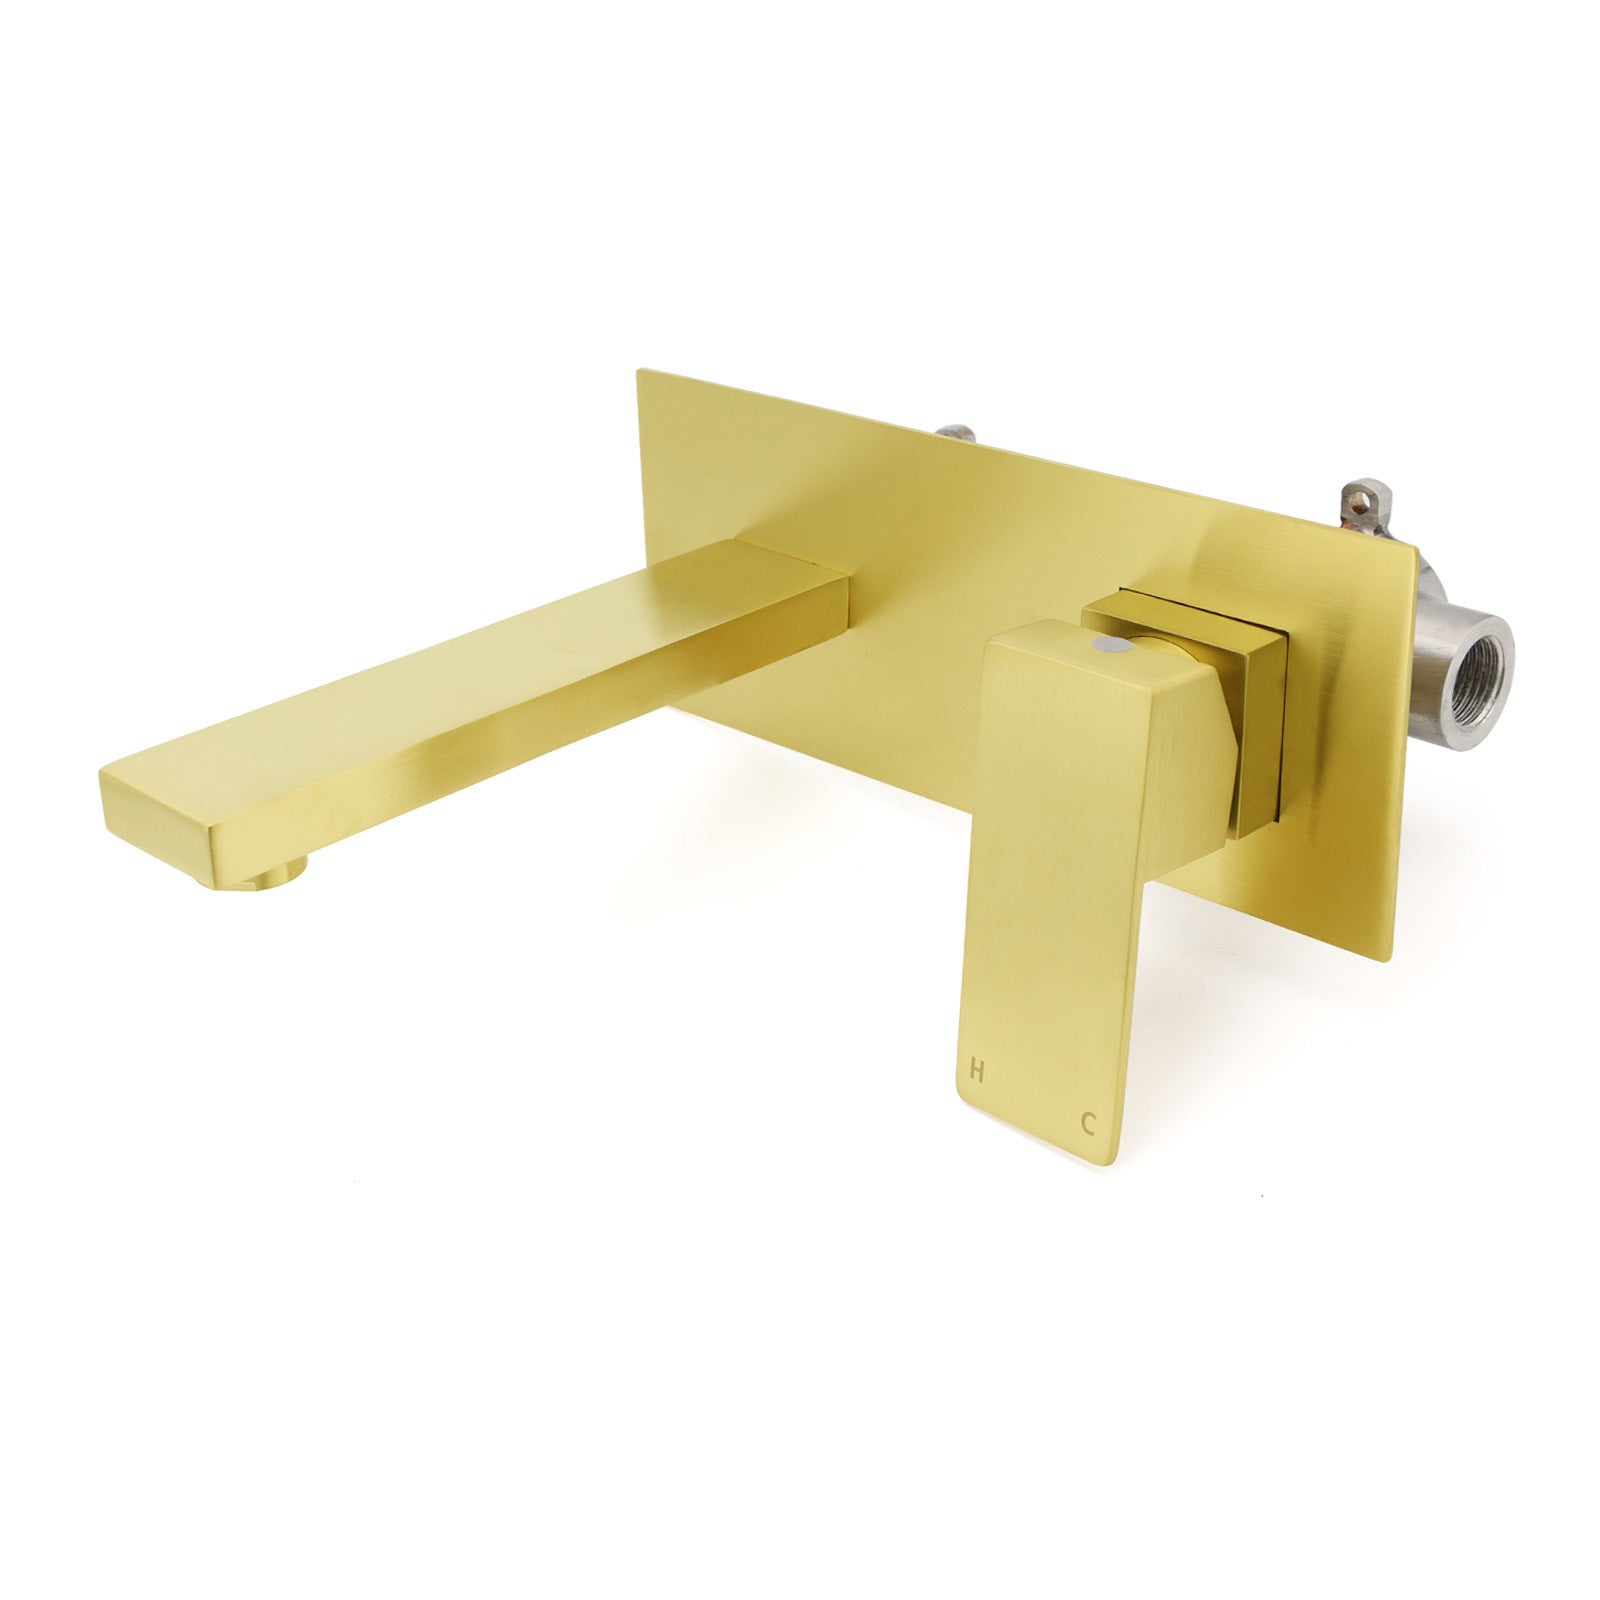 WELS Brushed Gold Wall Mount Basin Mixer Laundry Vanity Tap Spout Faucet Outlet